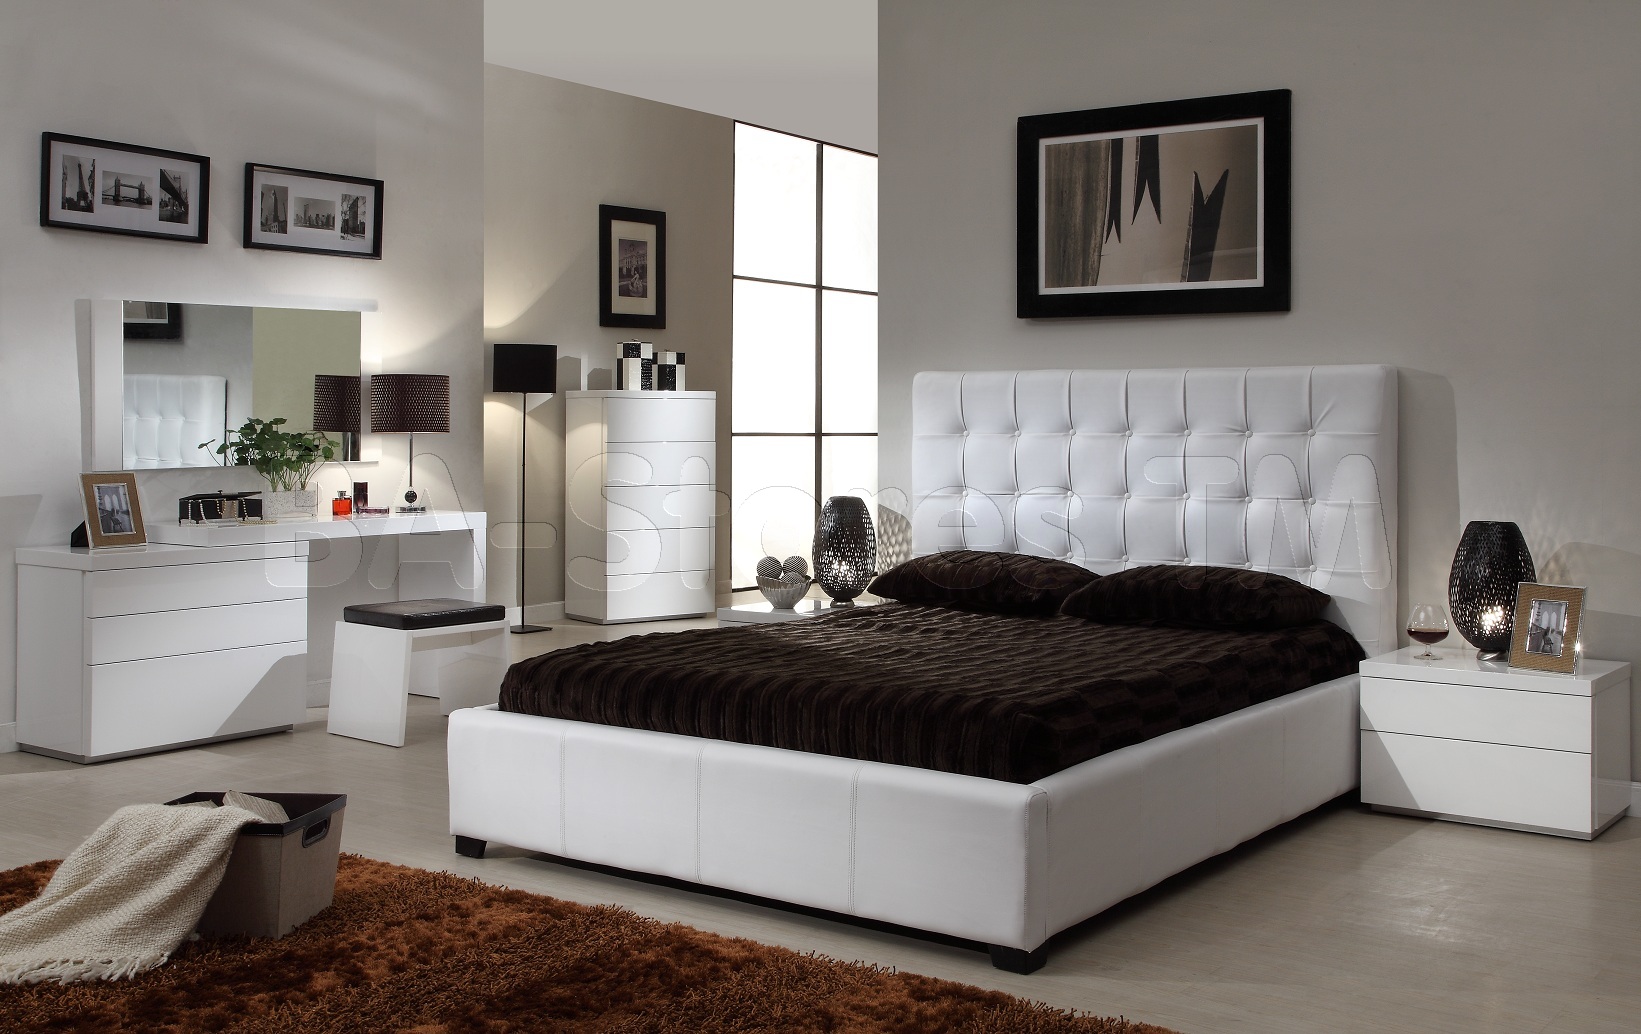 How To Choose Bedroom Furniture